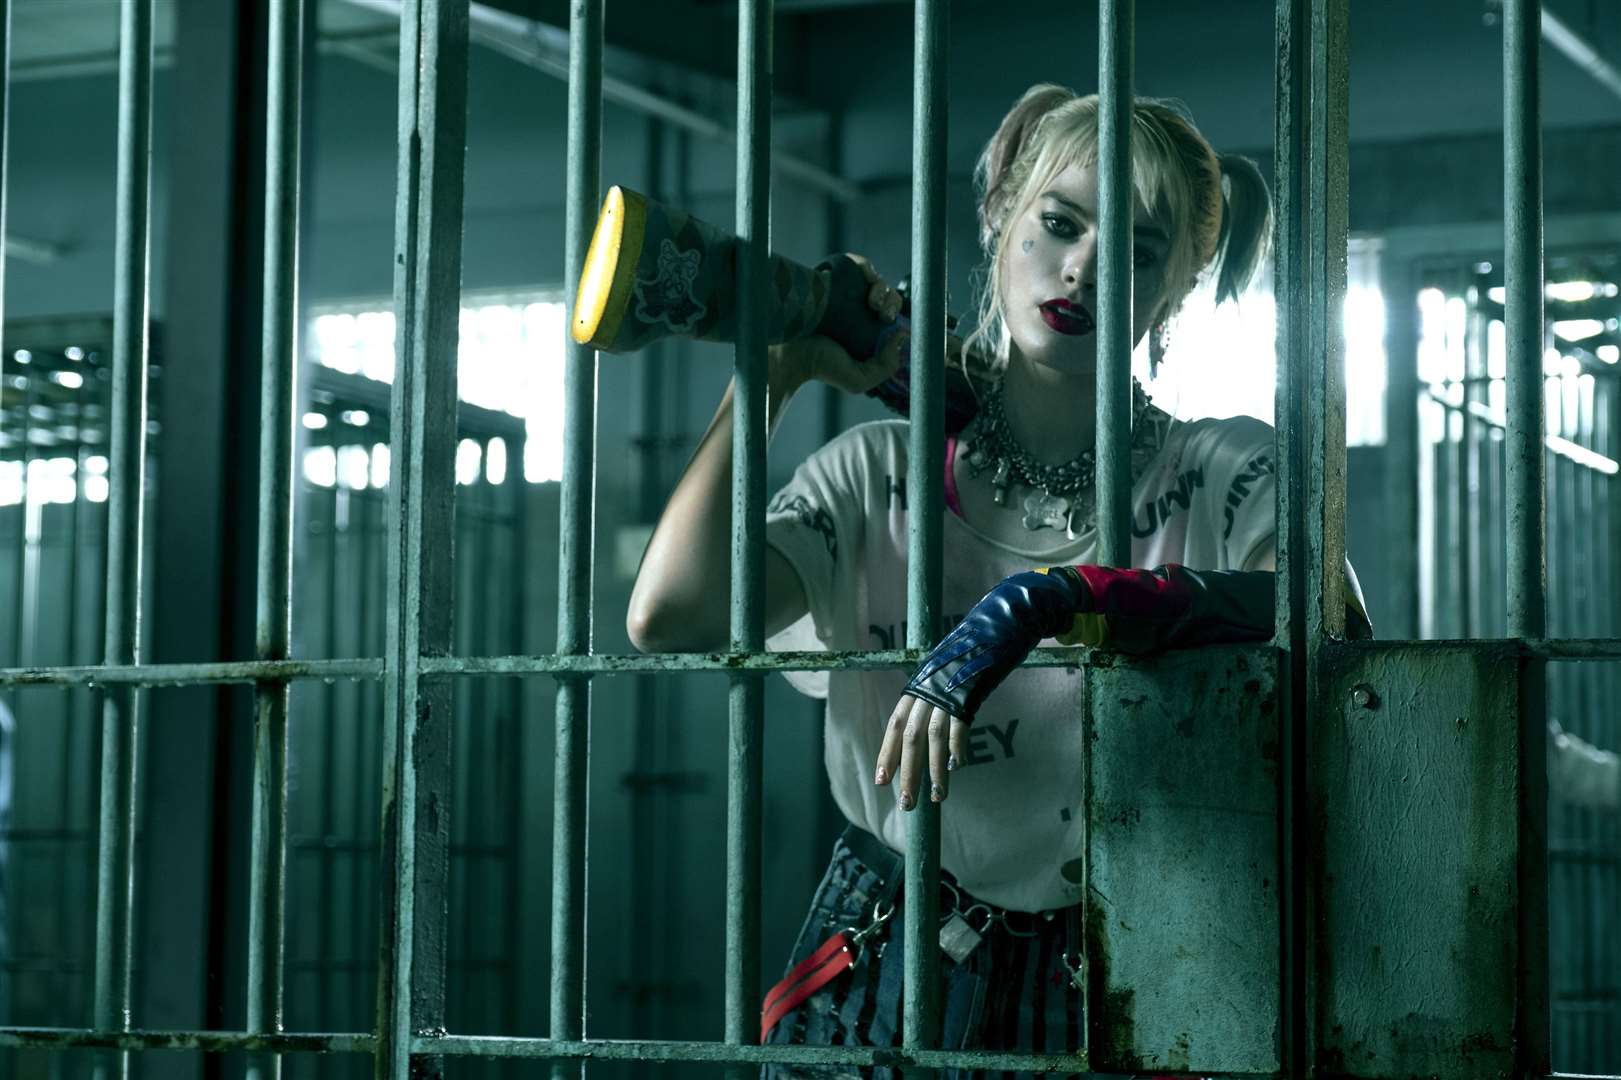 Birds Of Prey (And The Fantabulous Emancipation Of One Harley Quinn). Pictured: Margot Robbie as Harley Quinn Picture: PA Photo/Warner Bros. Entertainment Inc./Claudette Barius.